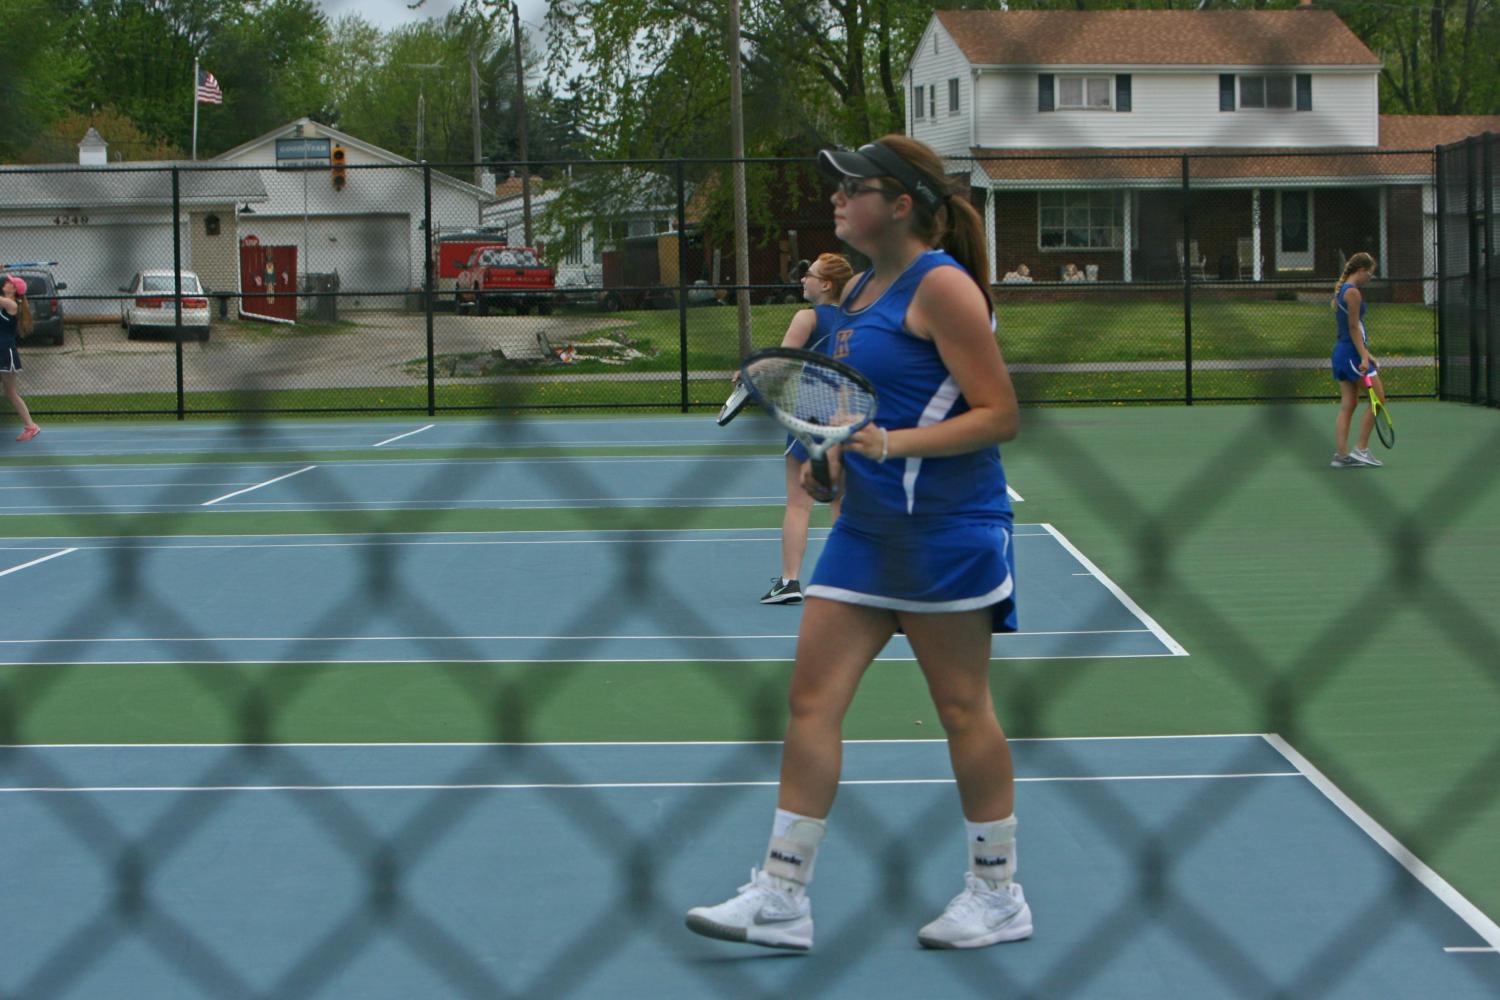 No. 1 singles player Stephanie Lane won her match against Owosso 6-4, 6-2 on Friday, April 28, as part of the K-O Clash.